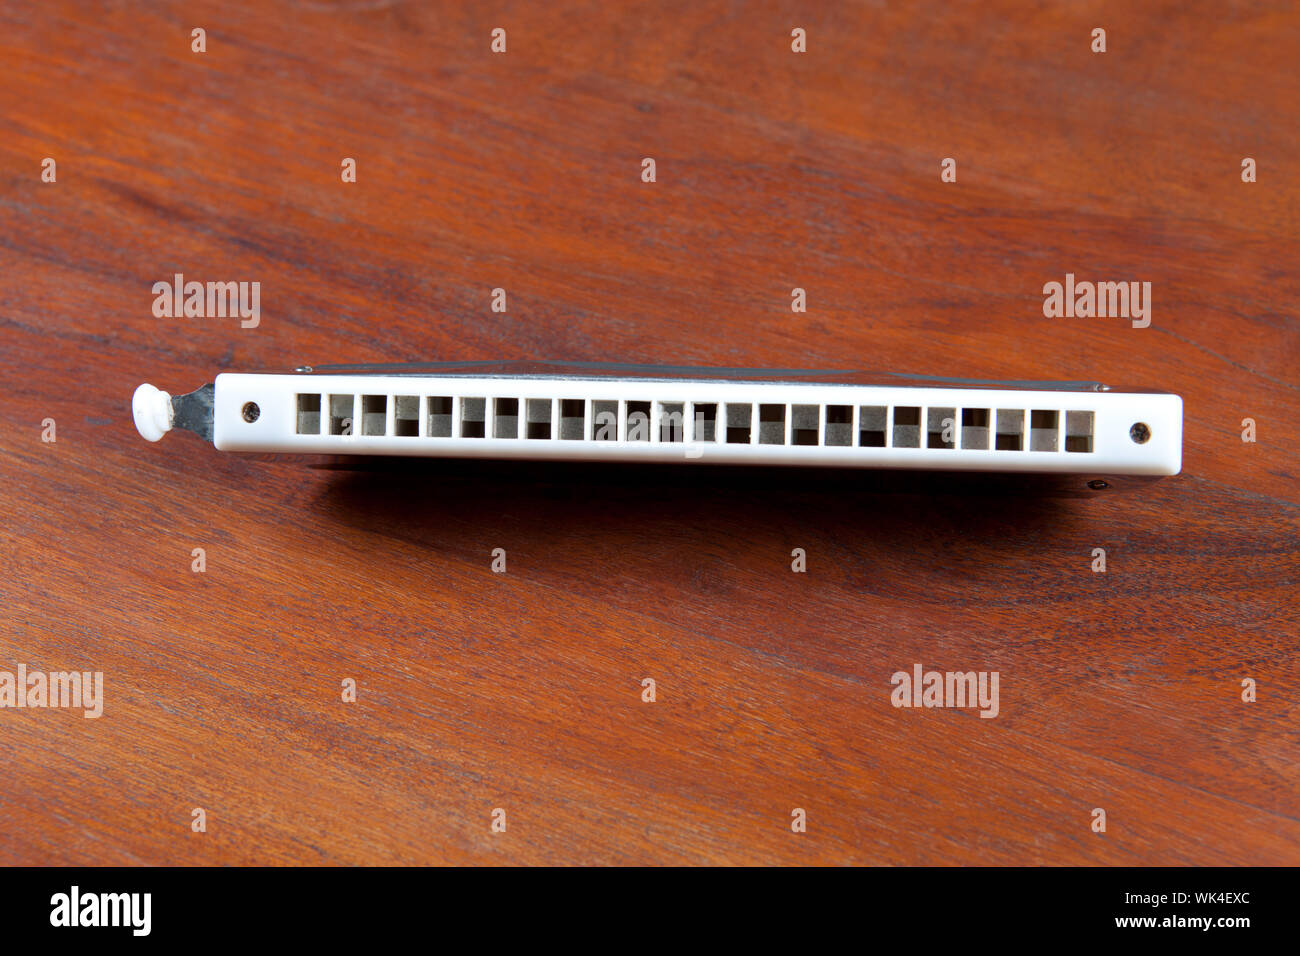 Close-up of a mouth organ on wooden floor Stock Photo